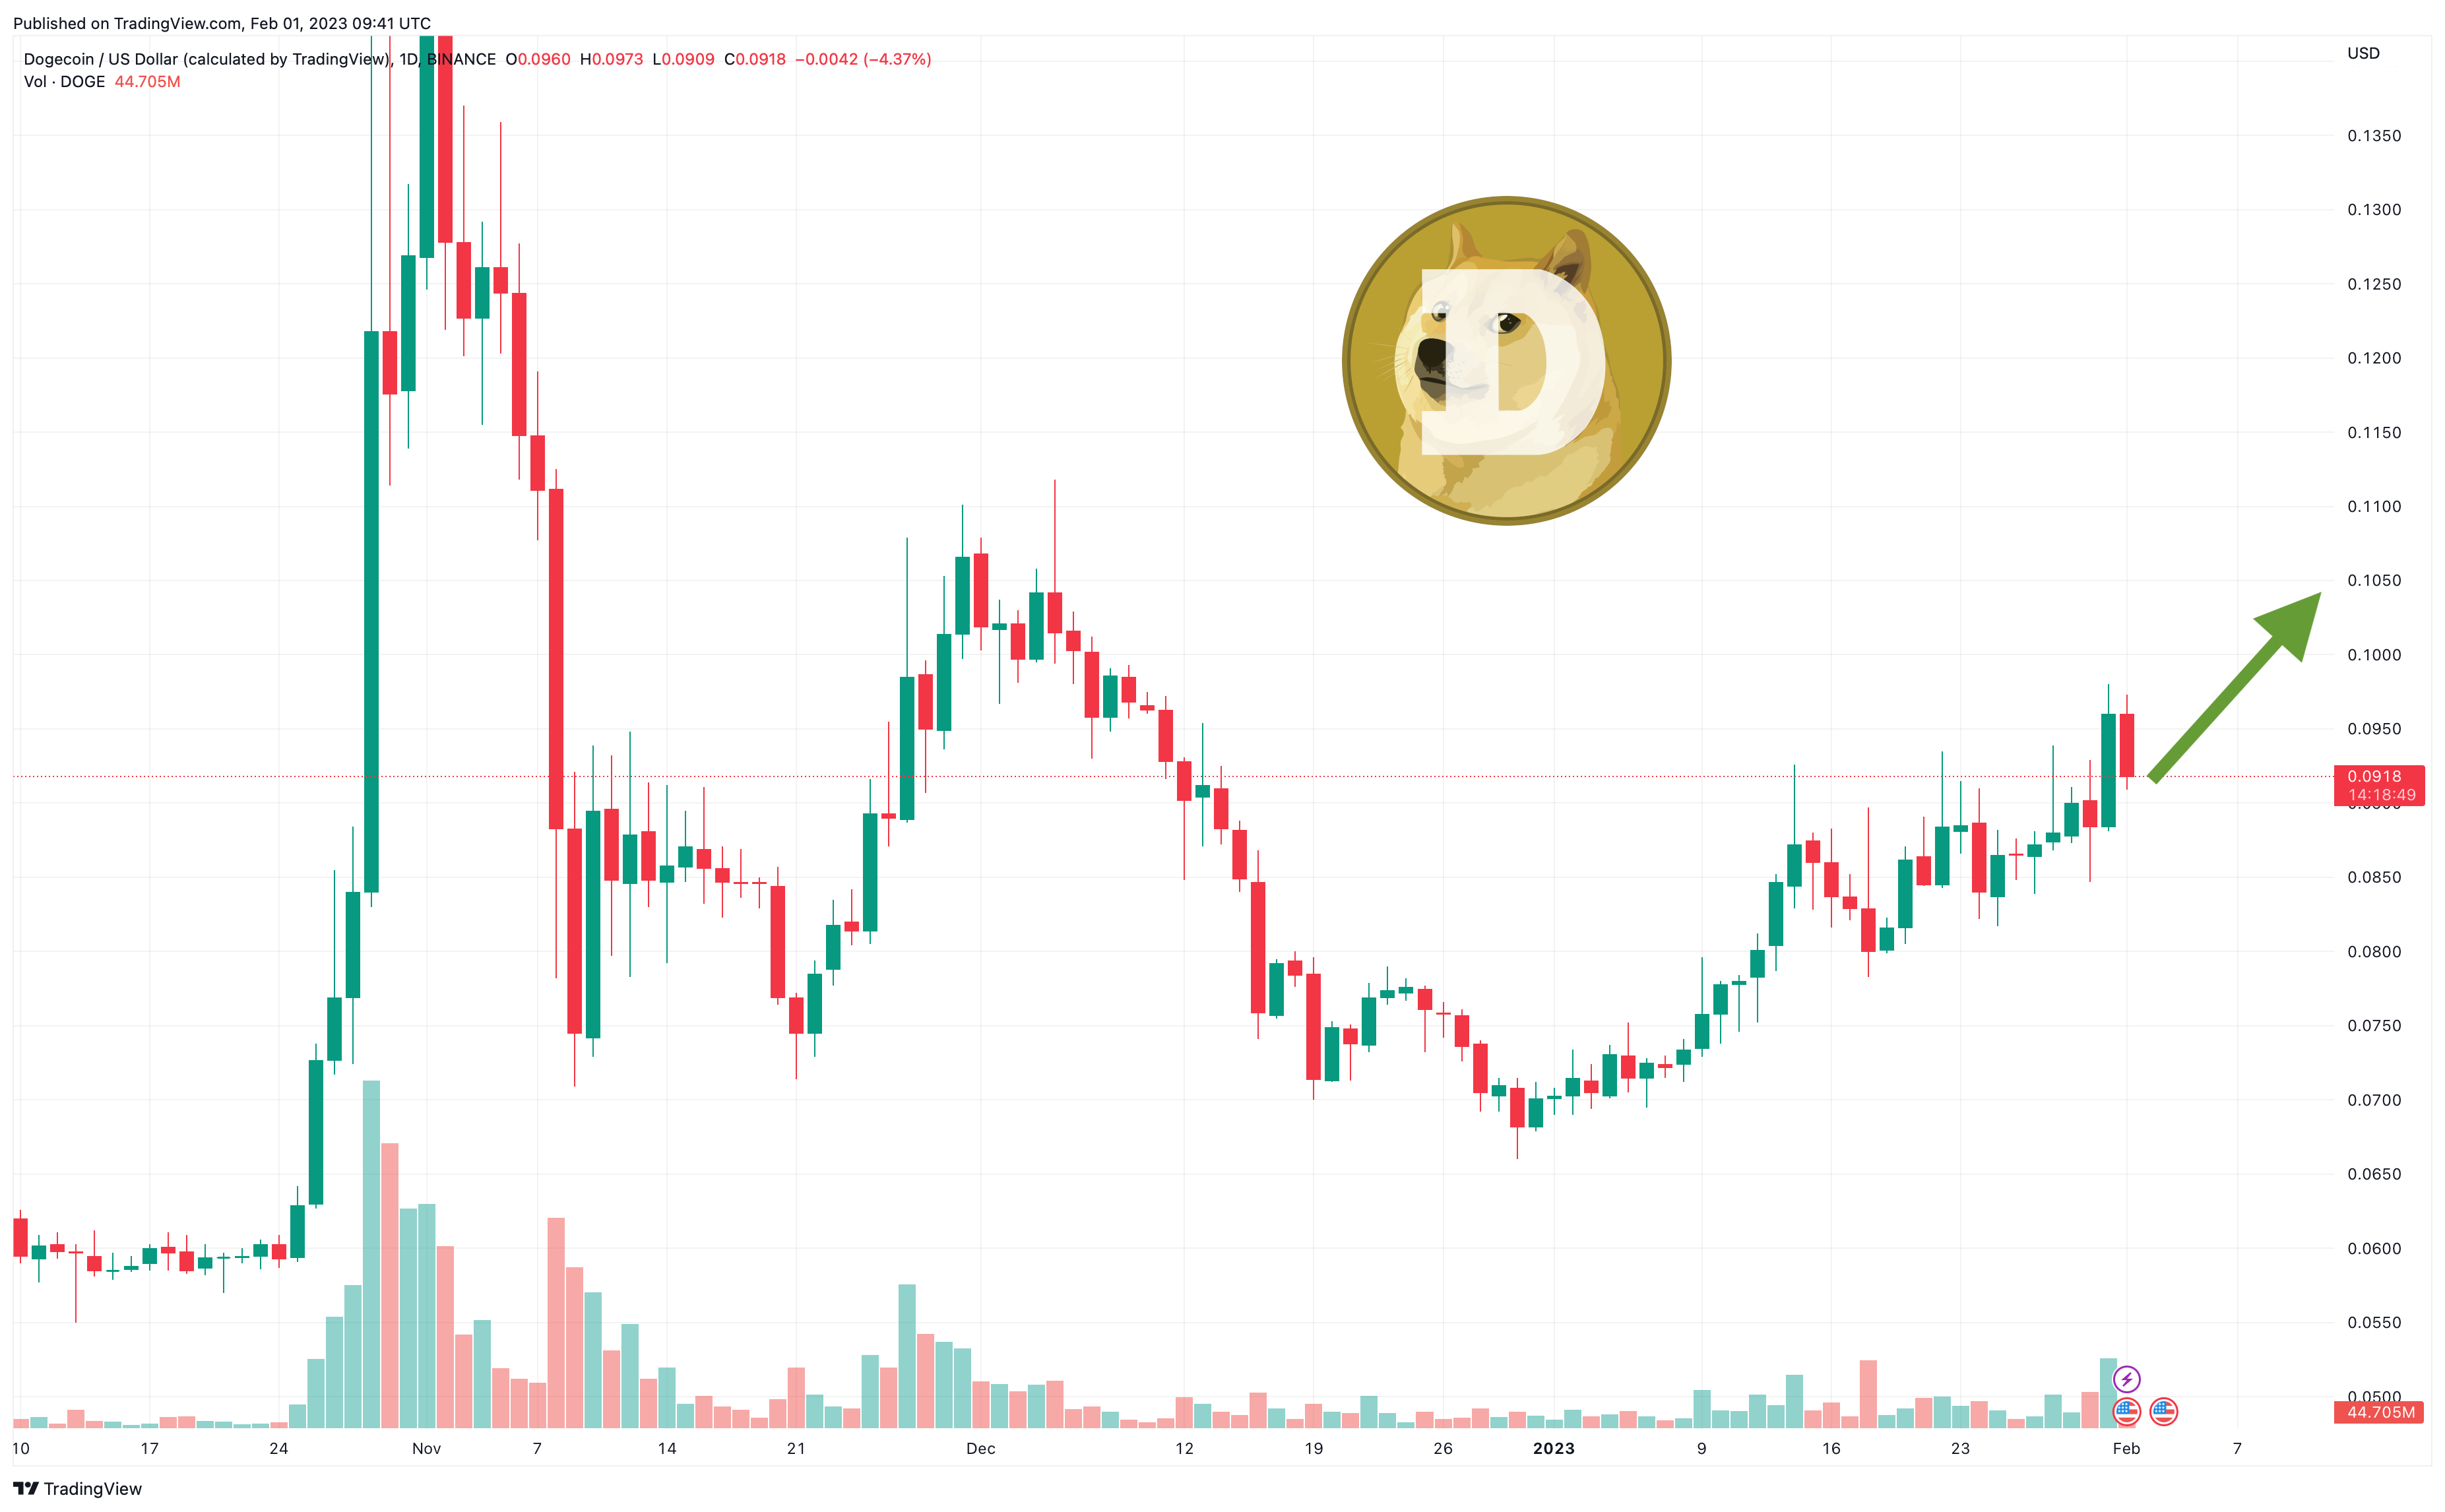 Dogecoin (DOGE) Price Forecast: What to Expect as Miners Offload $24M in 40 Days | FXEmpire